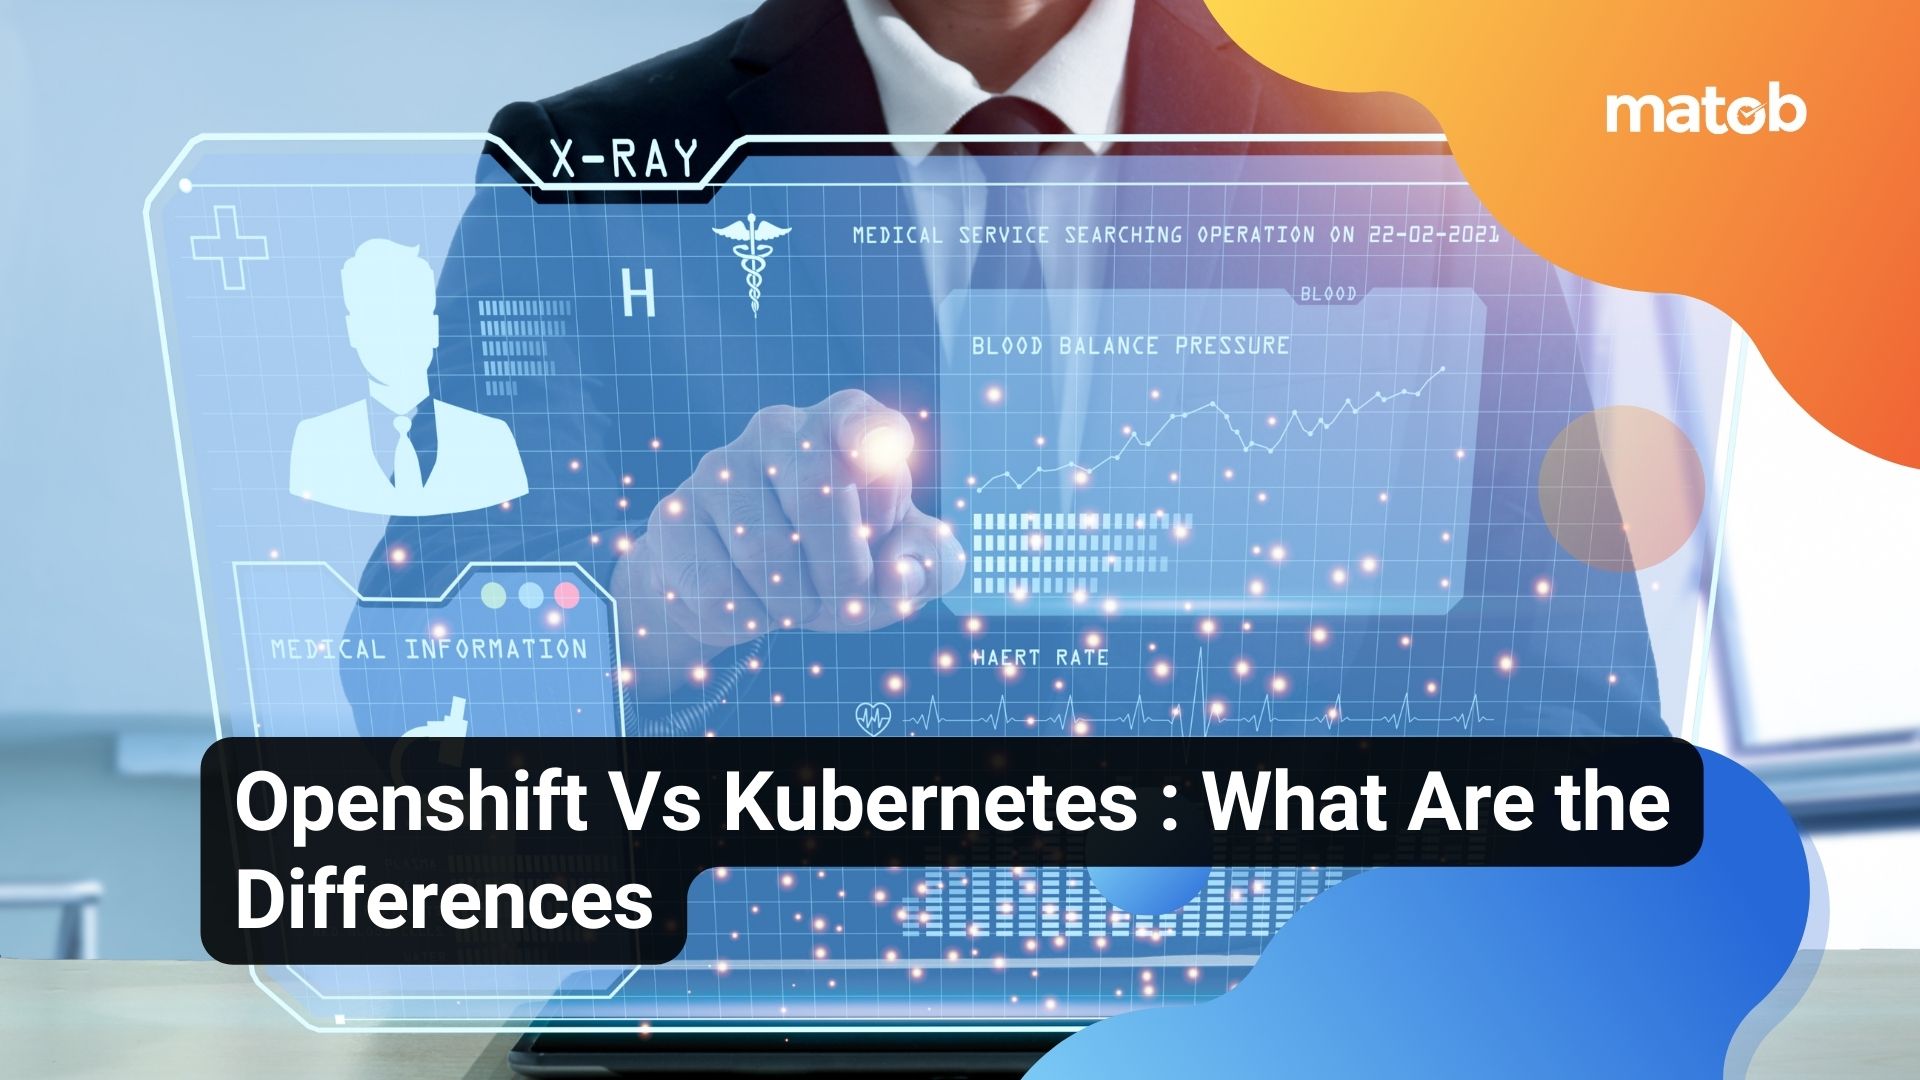 Openshift Vs Kubernetes : What Are the Differences